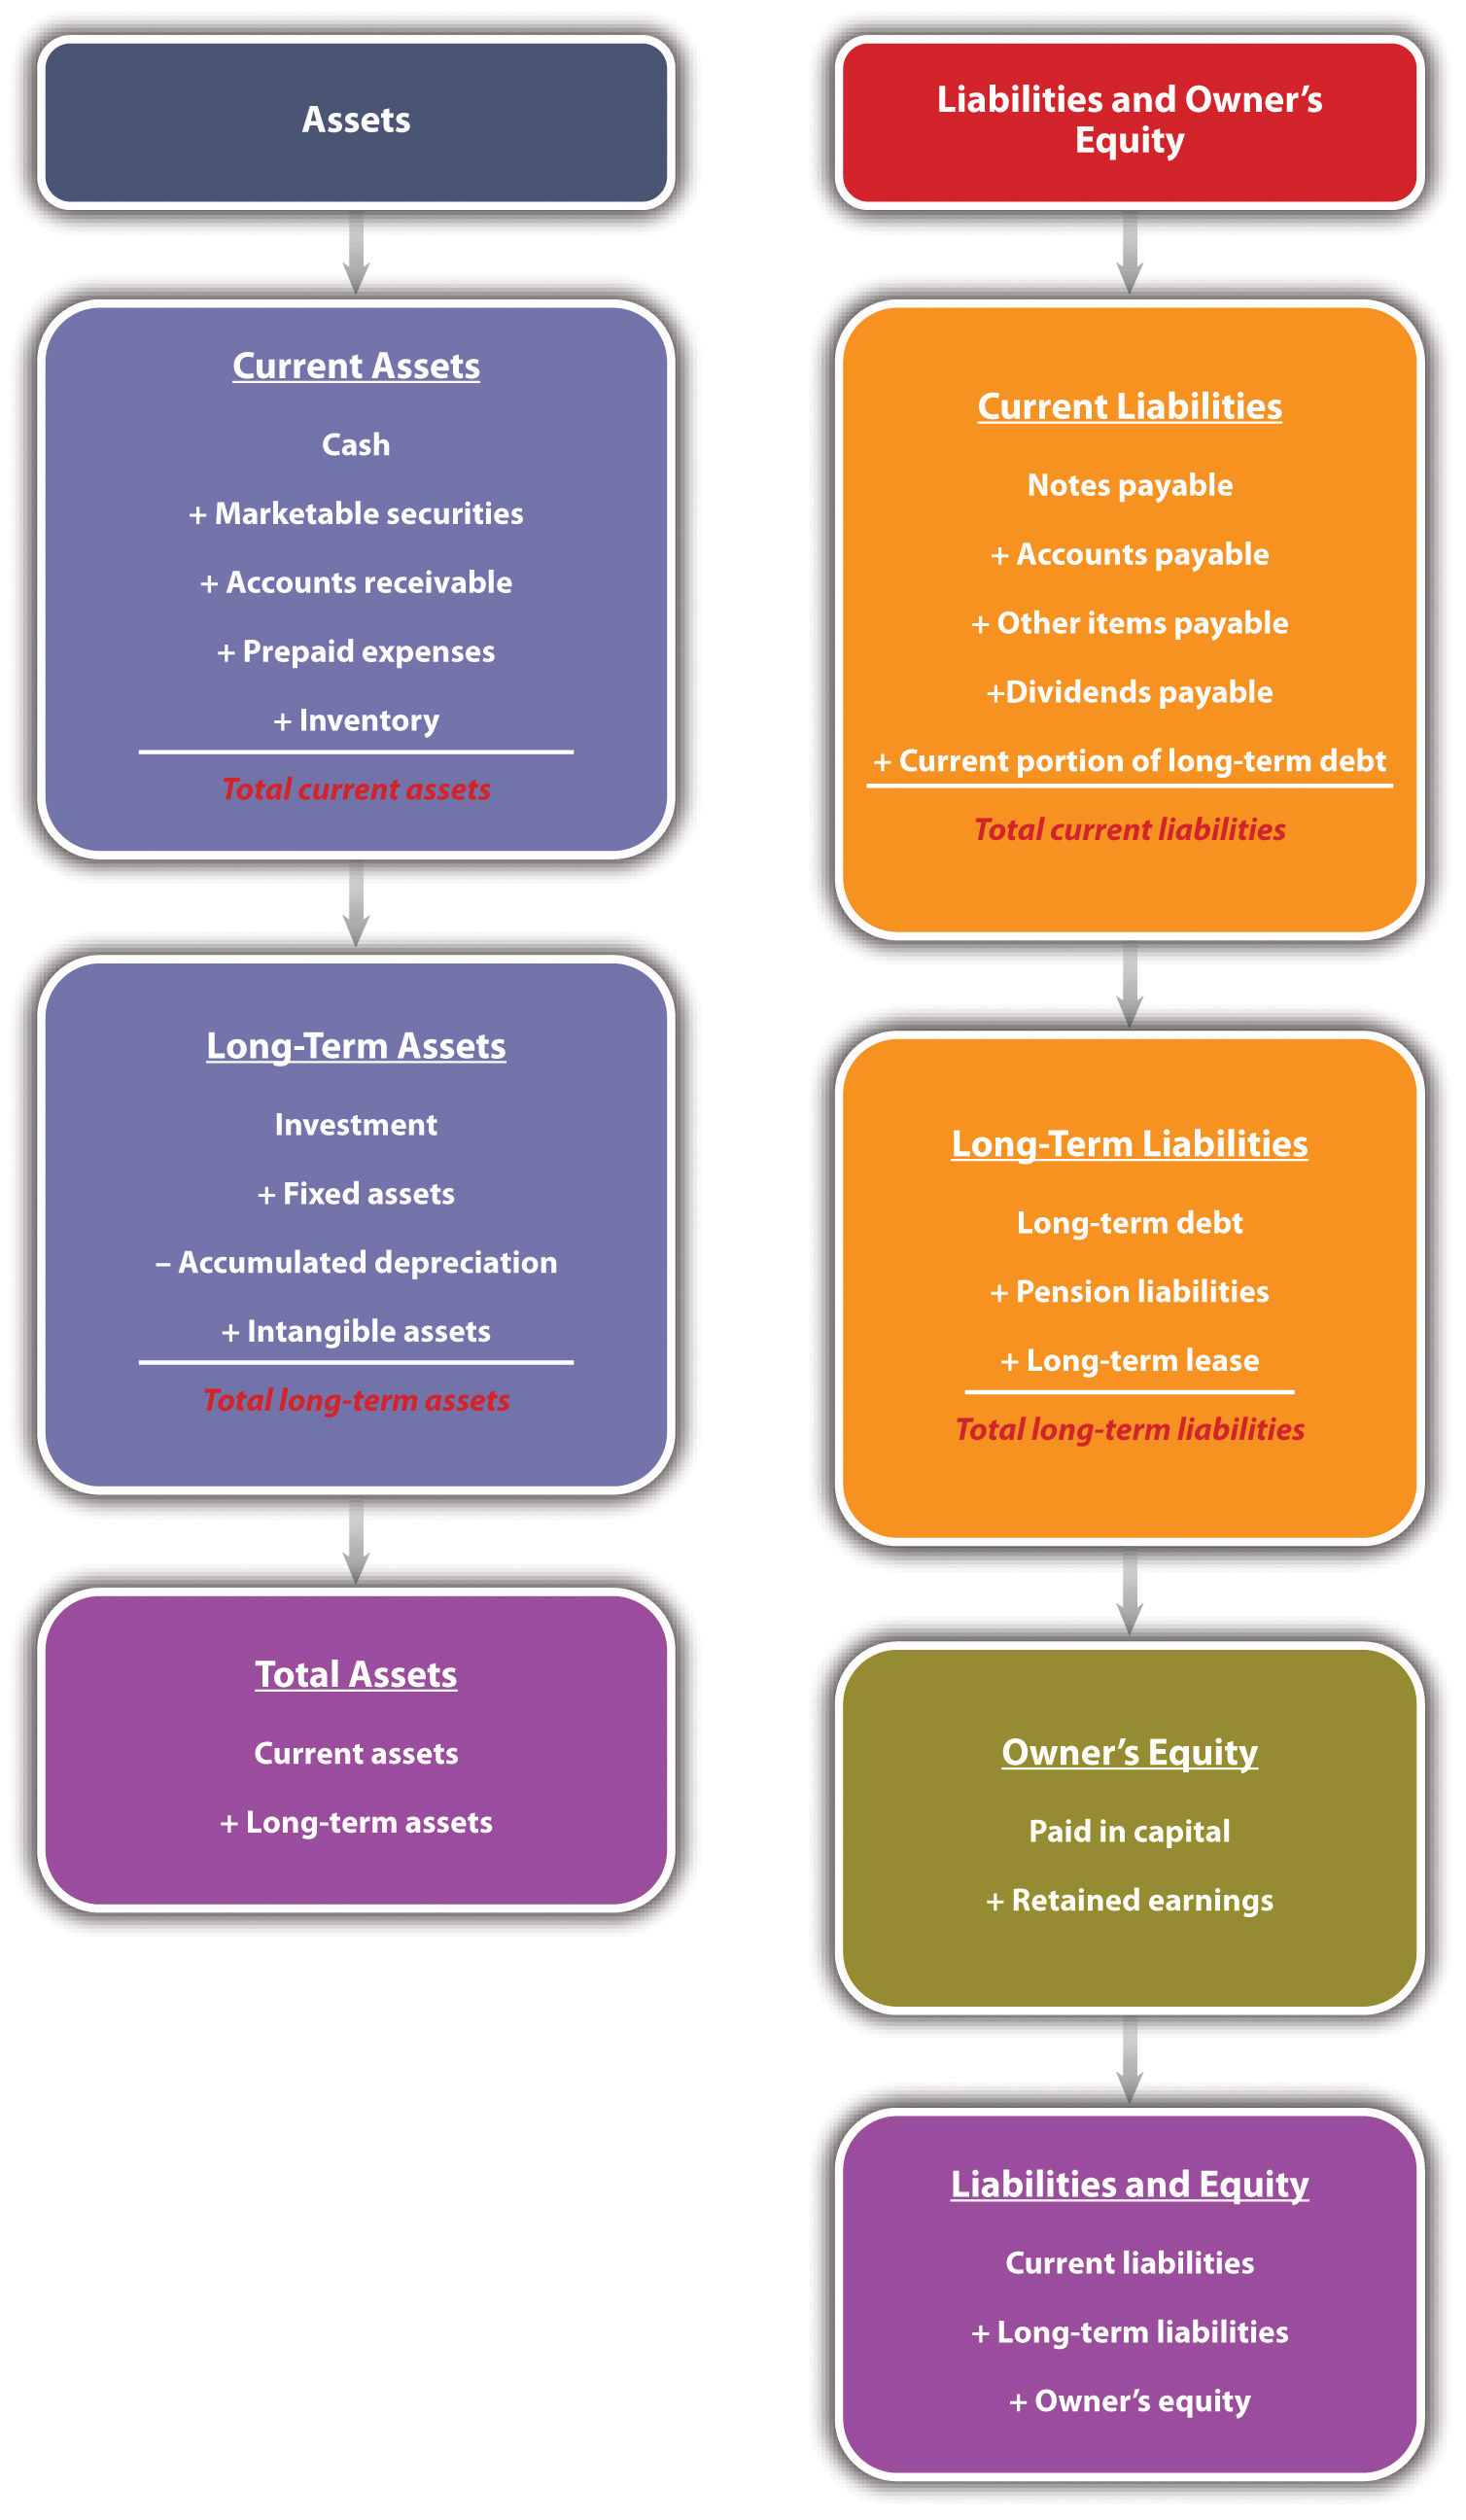 The balance sheet graphic - assets, liabilities, and owner's equity